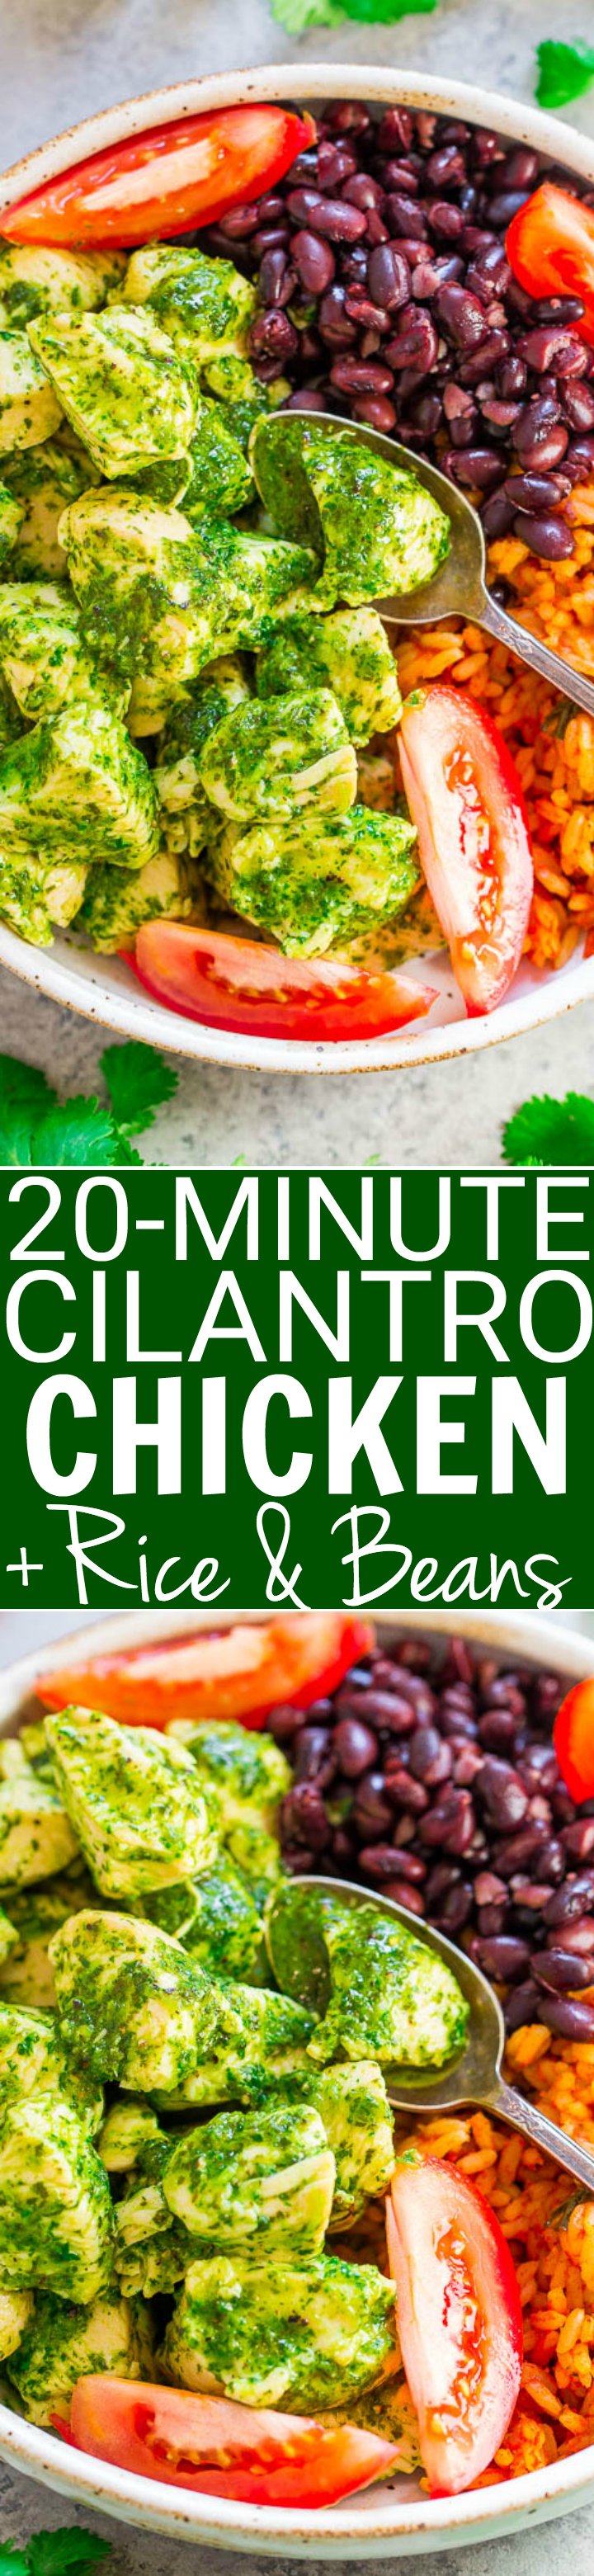 20-Minute Cilantro Chicken, Rice, and Beans — EASY, healthy, and the fresh cilantro sauce is SO good!! The chicken is juicy, loaded with flavor, and along with the rice and beans and you'll be SATISFIED for hours!!